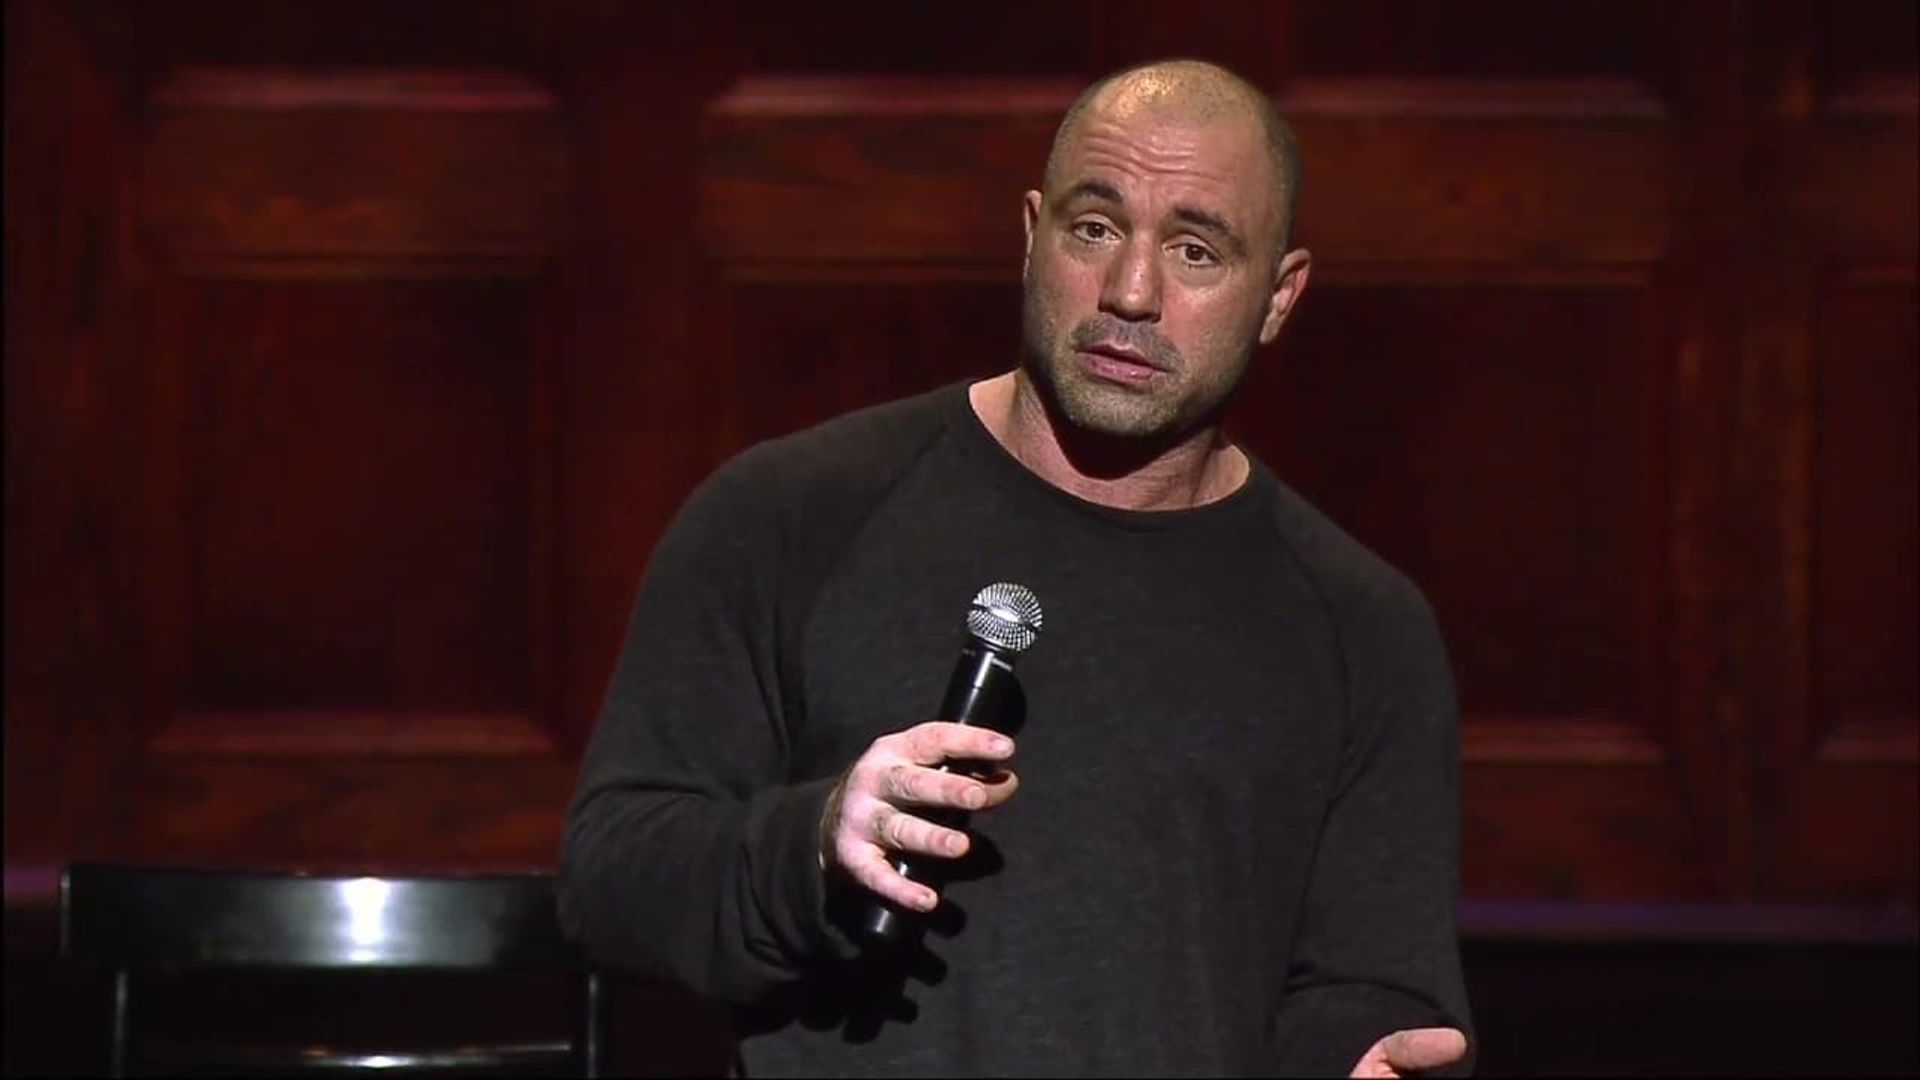 Joe Rogan Live from the Tabernacle background